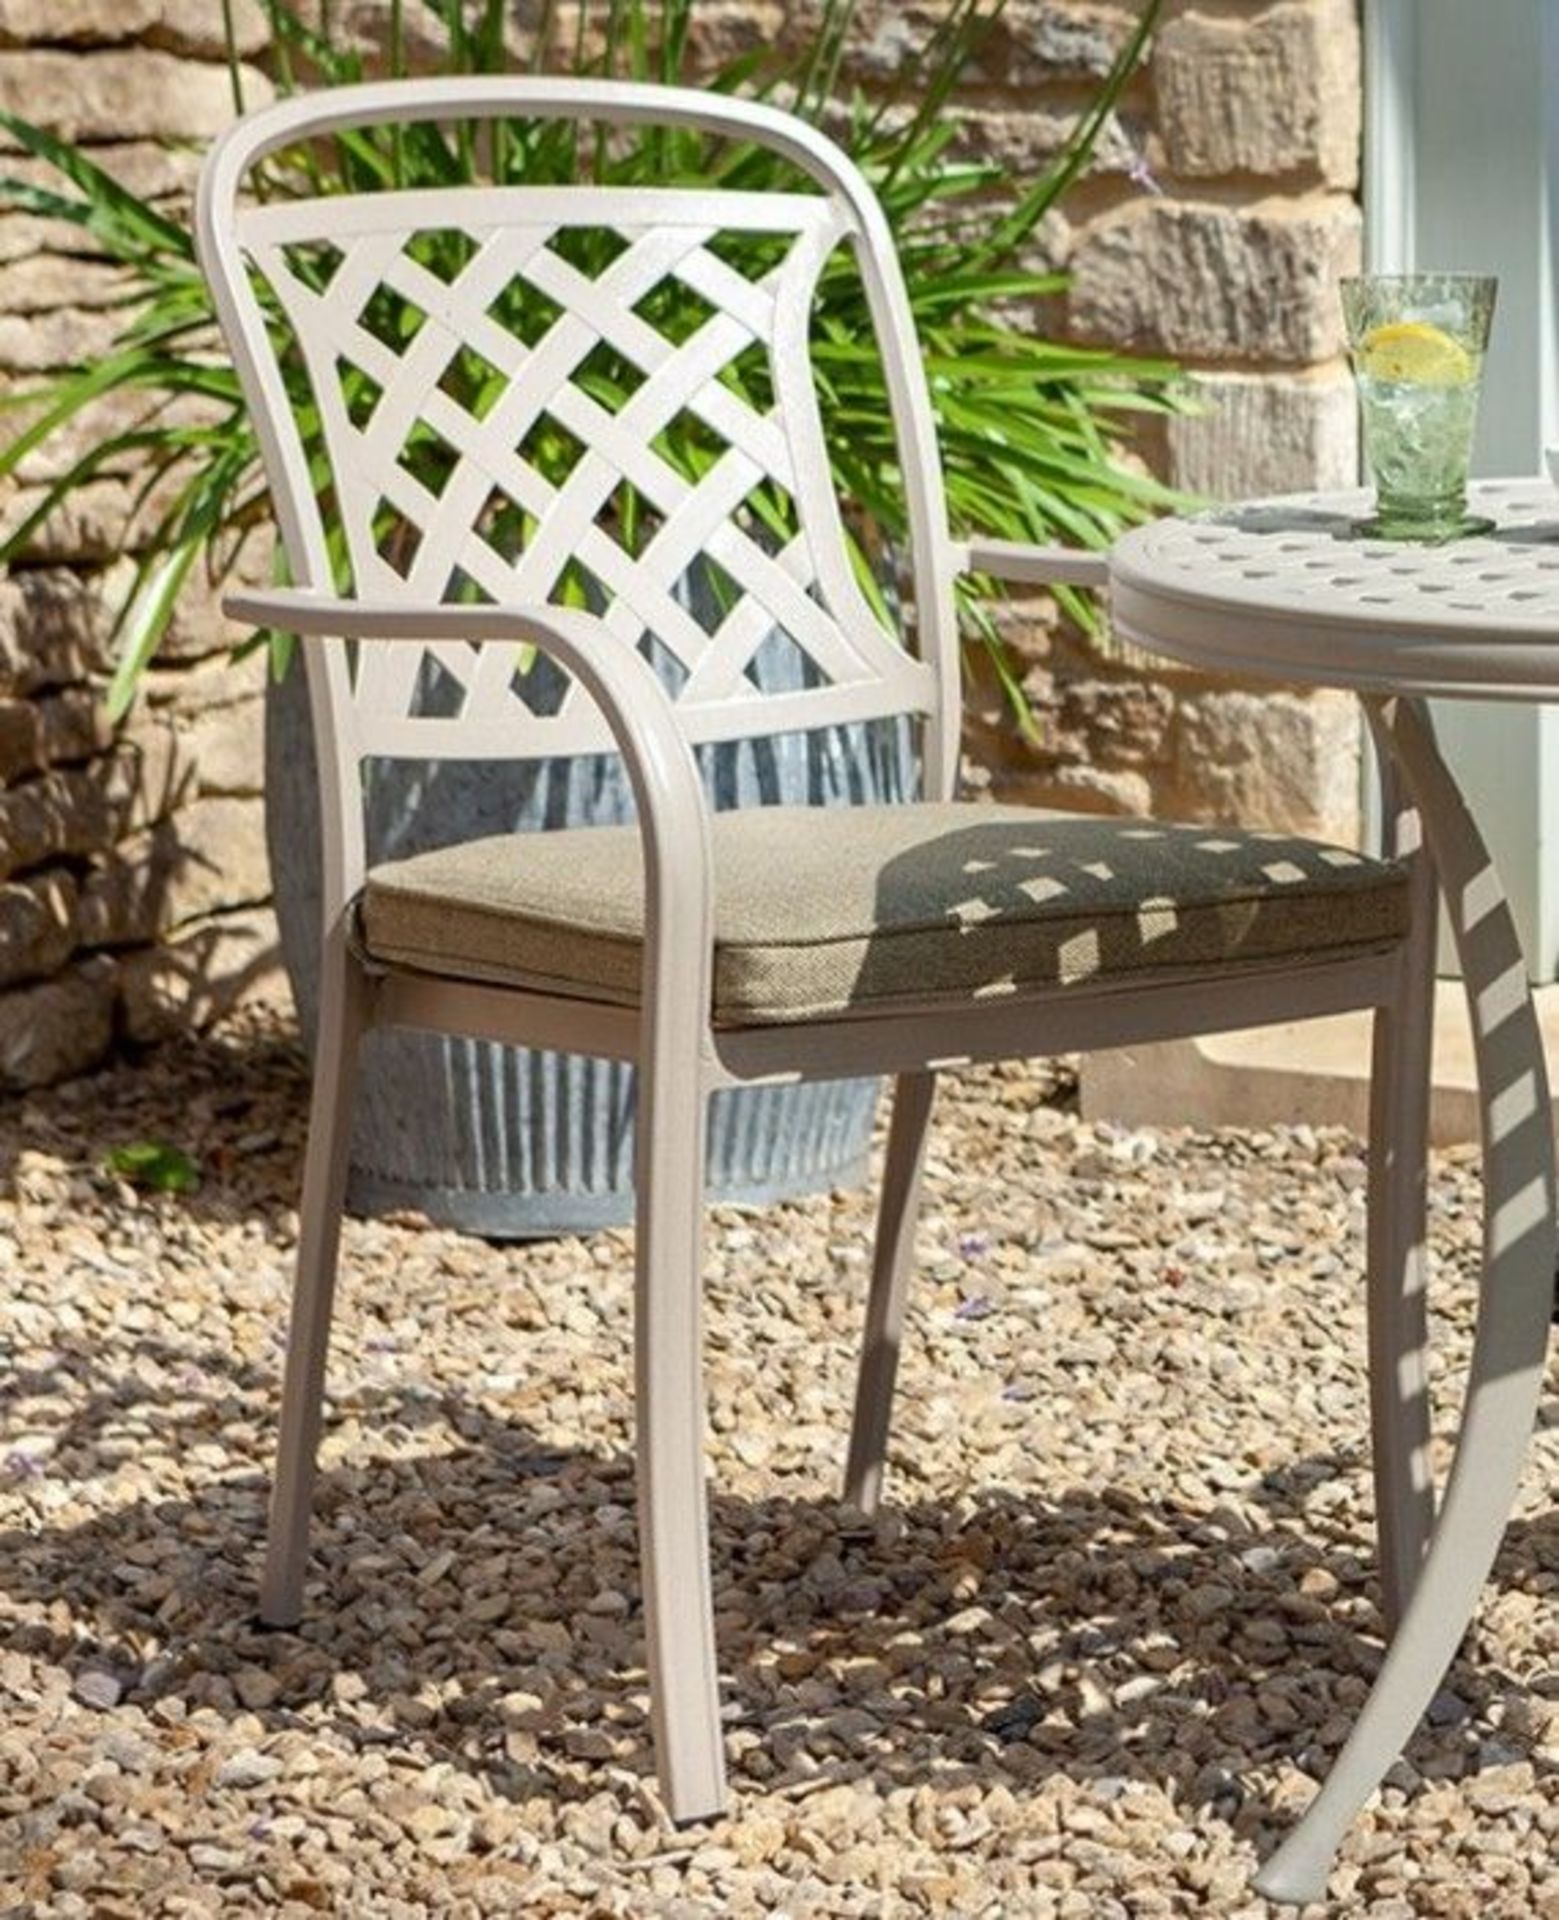 Hartman Berkeley Garden Furniture Dining Chair - Maize. - R13a.4. ONLY AVAILABLE AS A MINIMUM QTY OF - Image 2 of 2